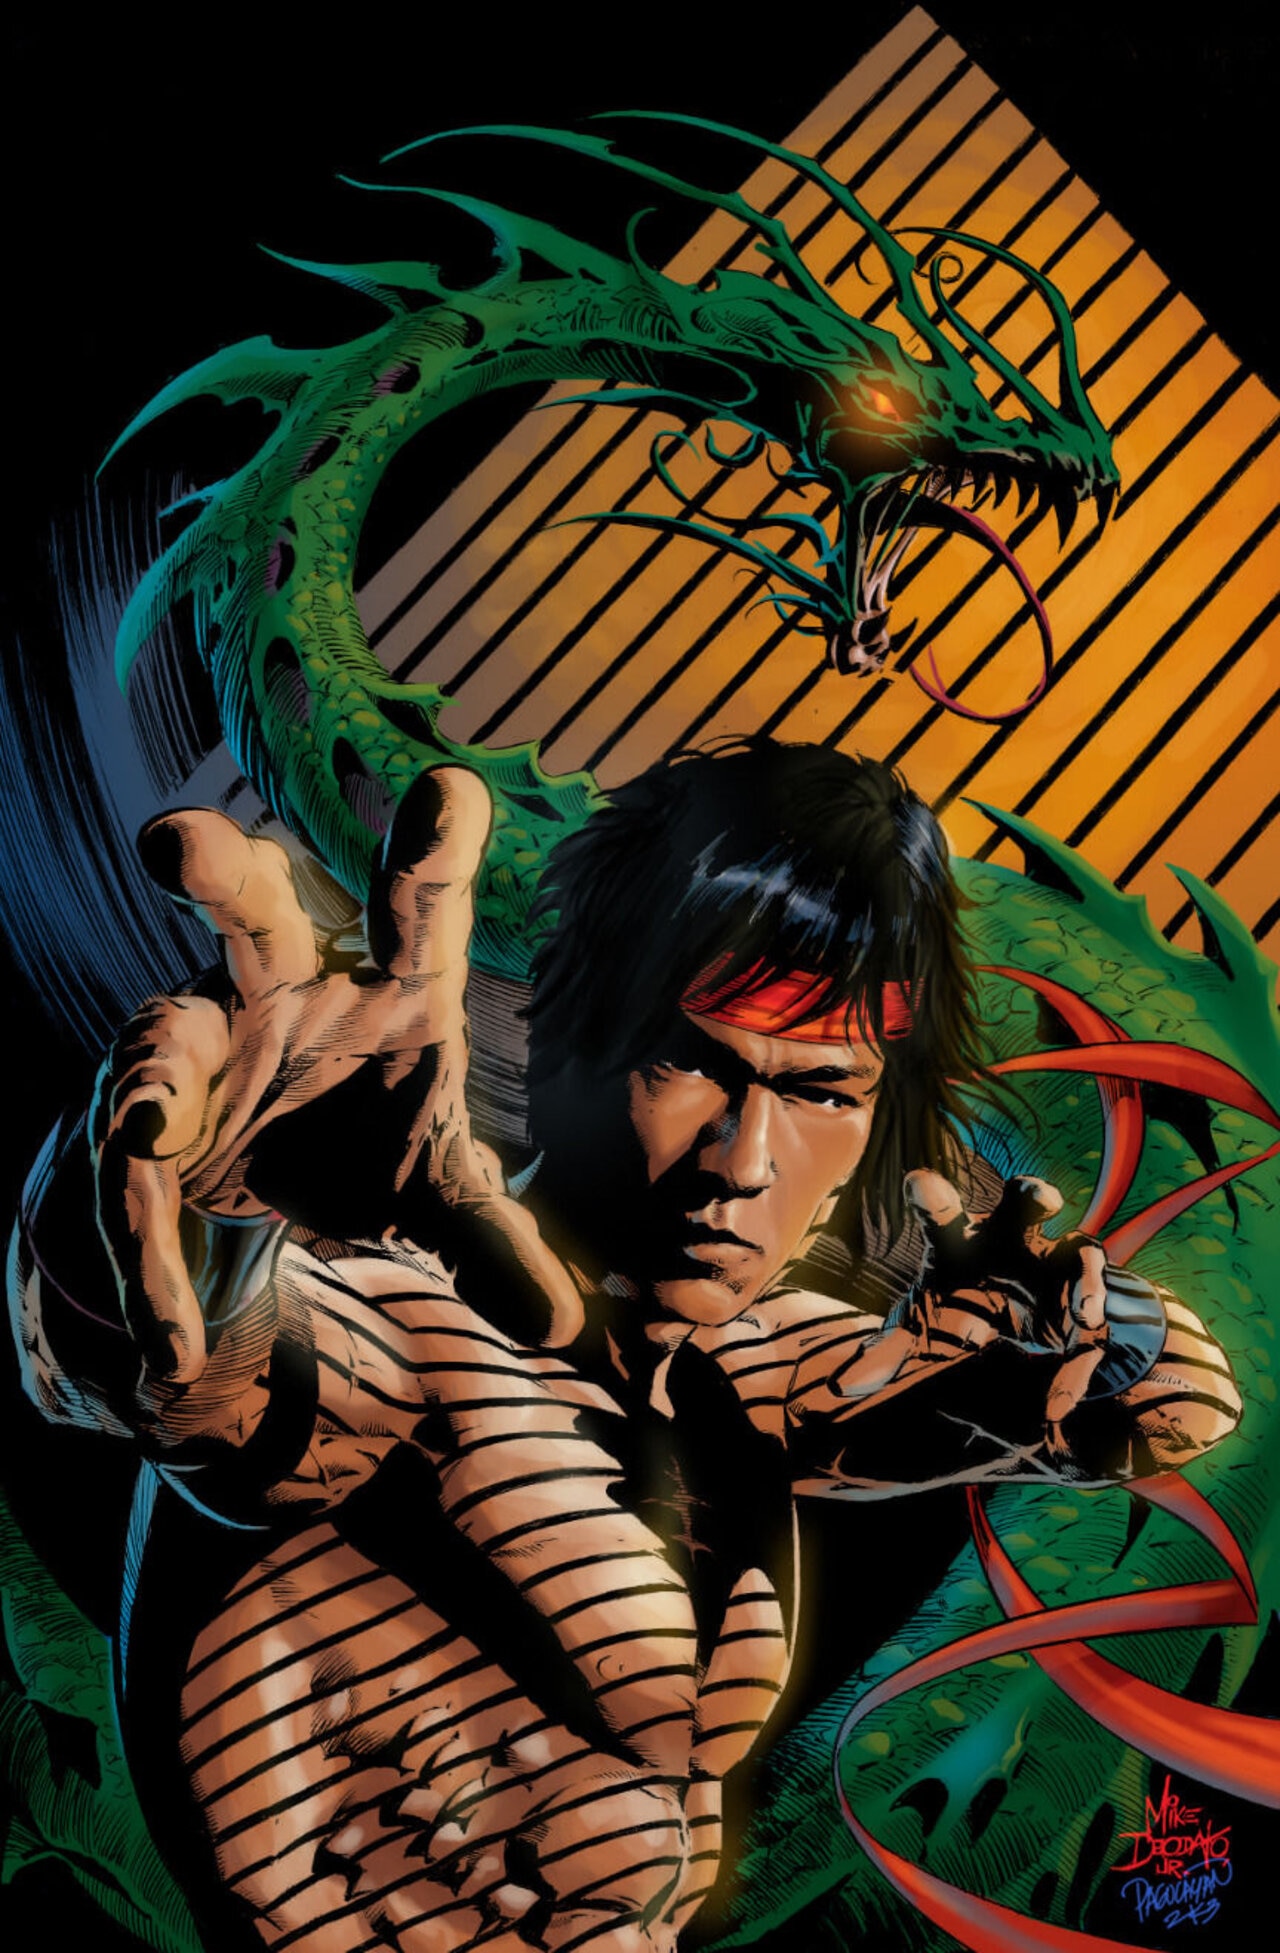 What styles of martial arts are seen/used in Shang-Chi and the